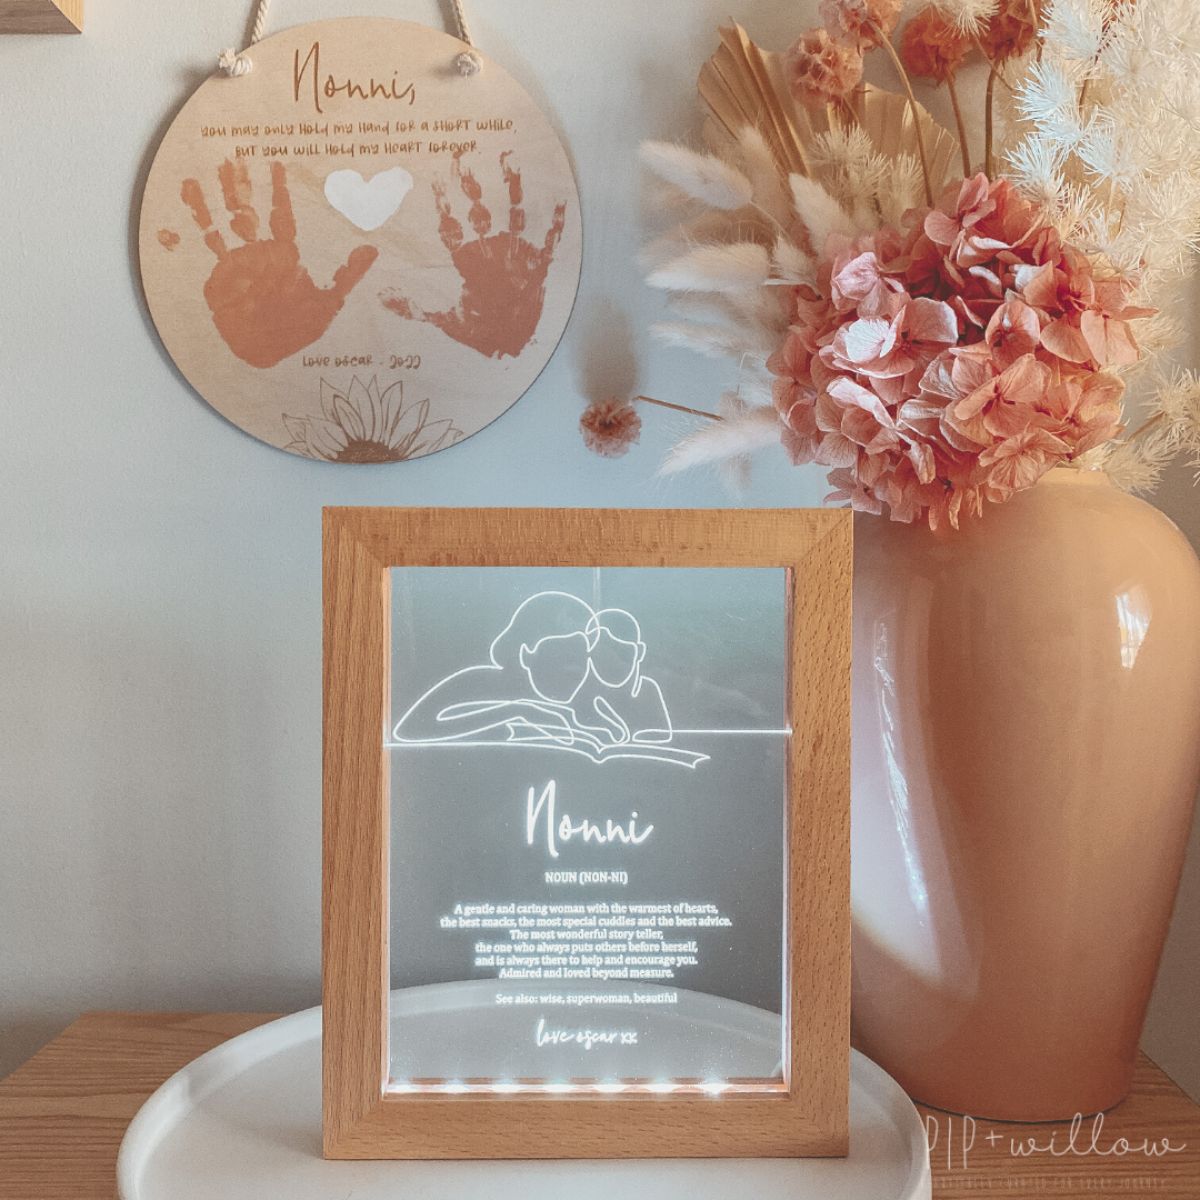 This is a Grandmother frame light normally given as a gift for Mother's day. The text on the frame is about a definition of a Grandmother. Photo is on the table